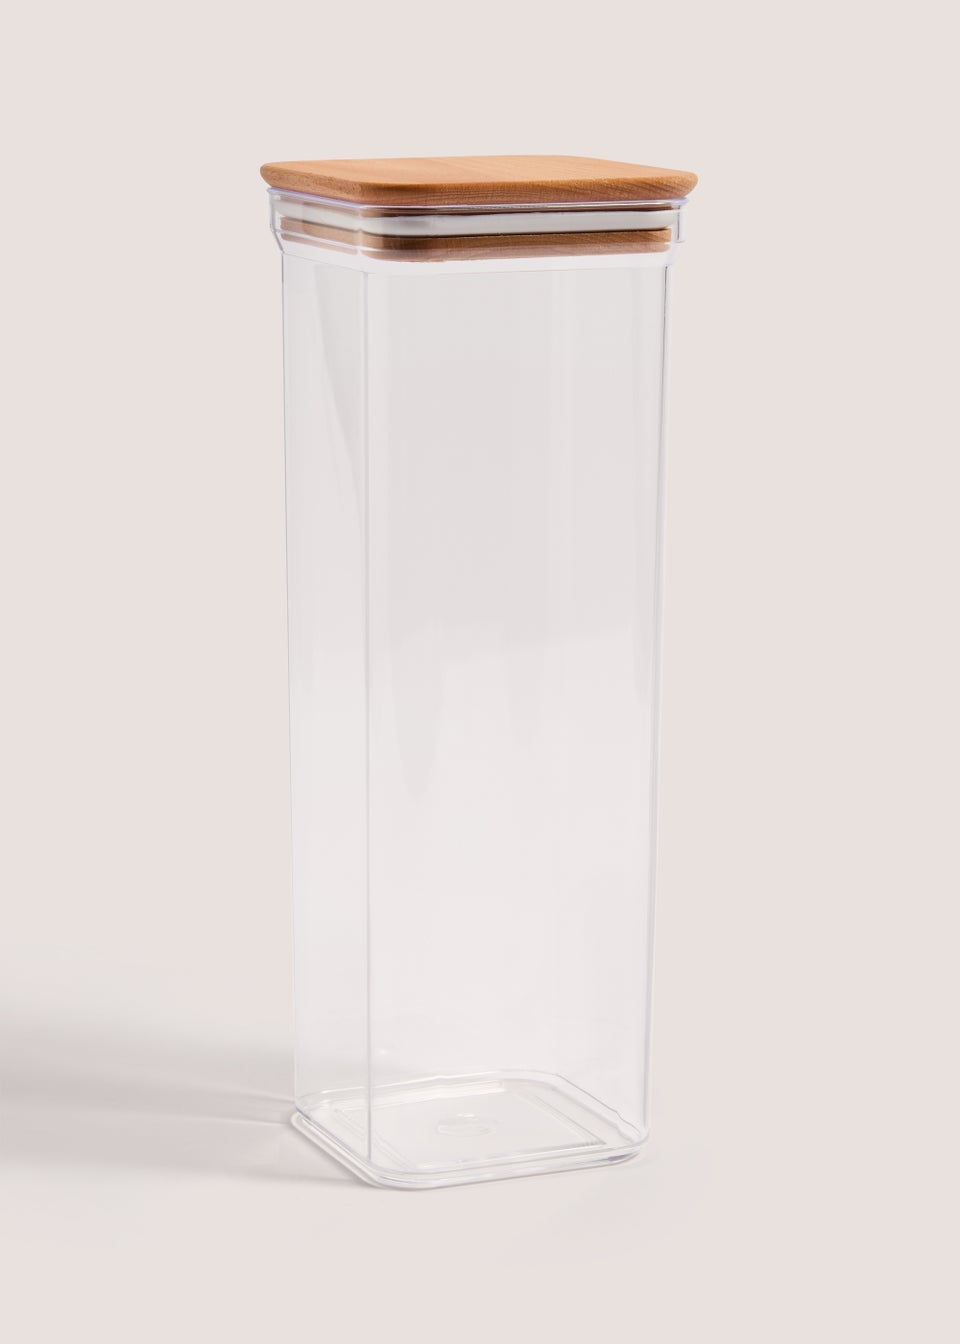 Clear Plastic Food Storage with Wooden Lid (28.5cm x 9.5cm)